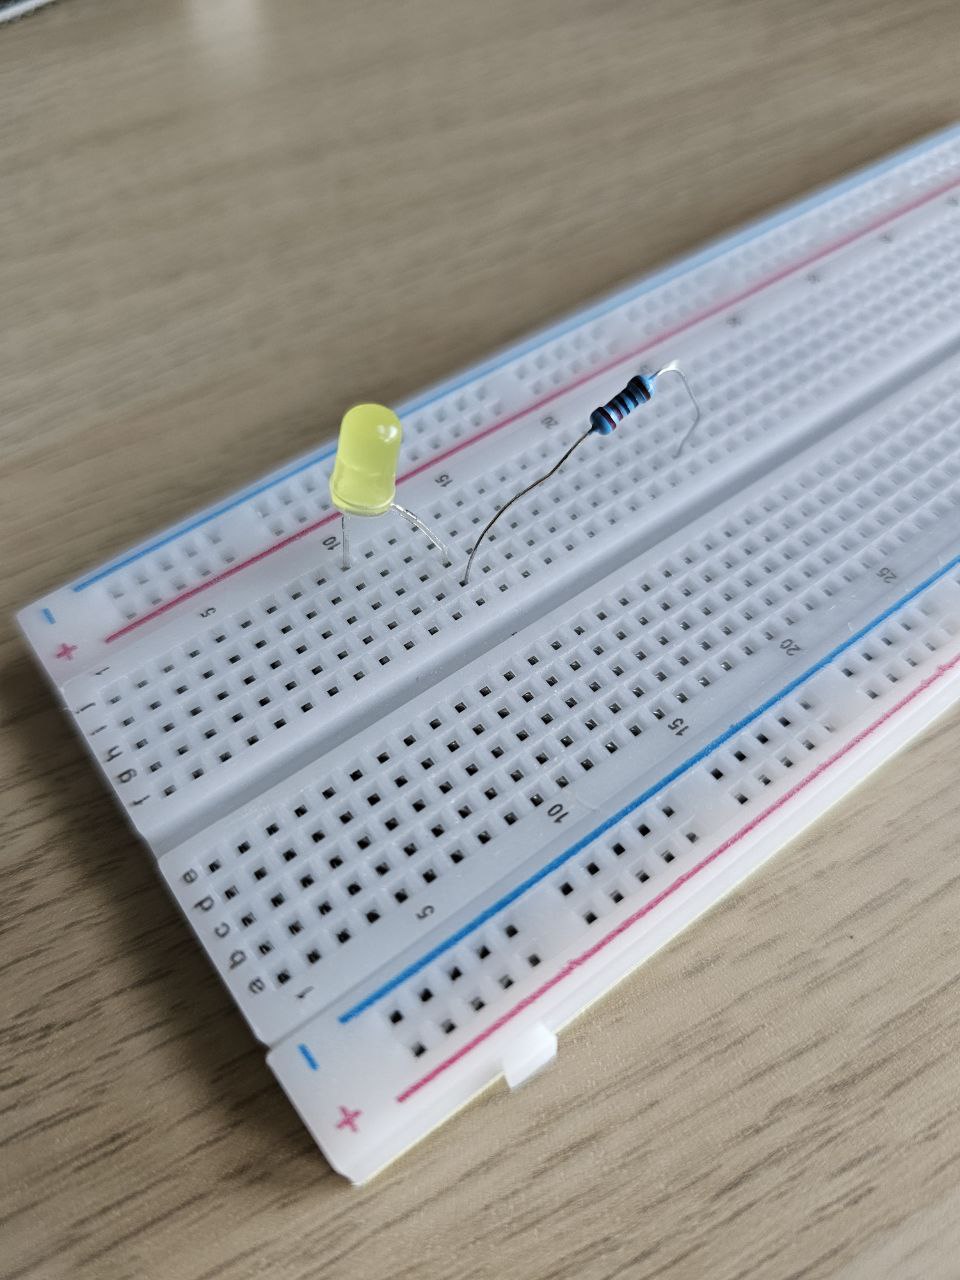 LED and a transistor series configuration from the side